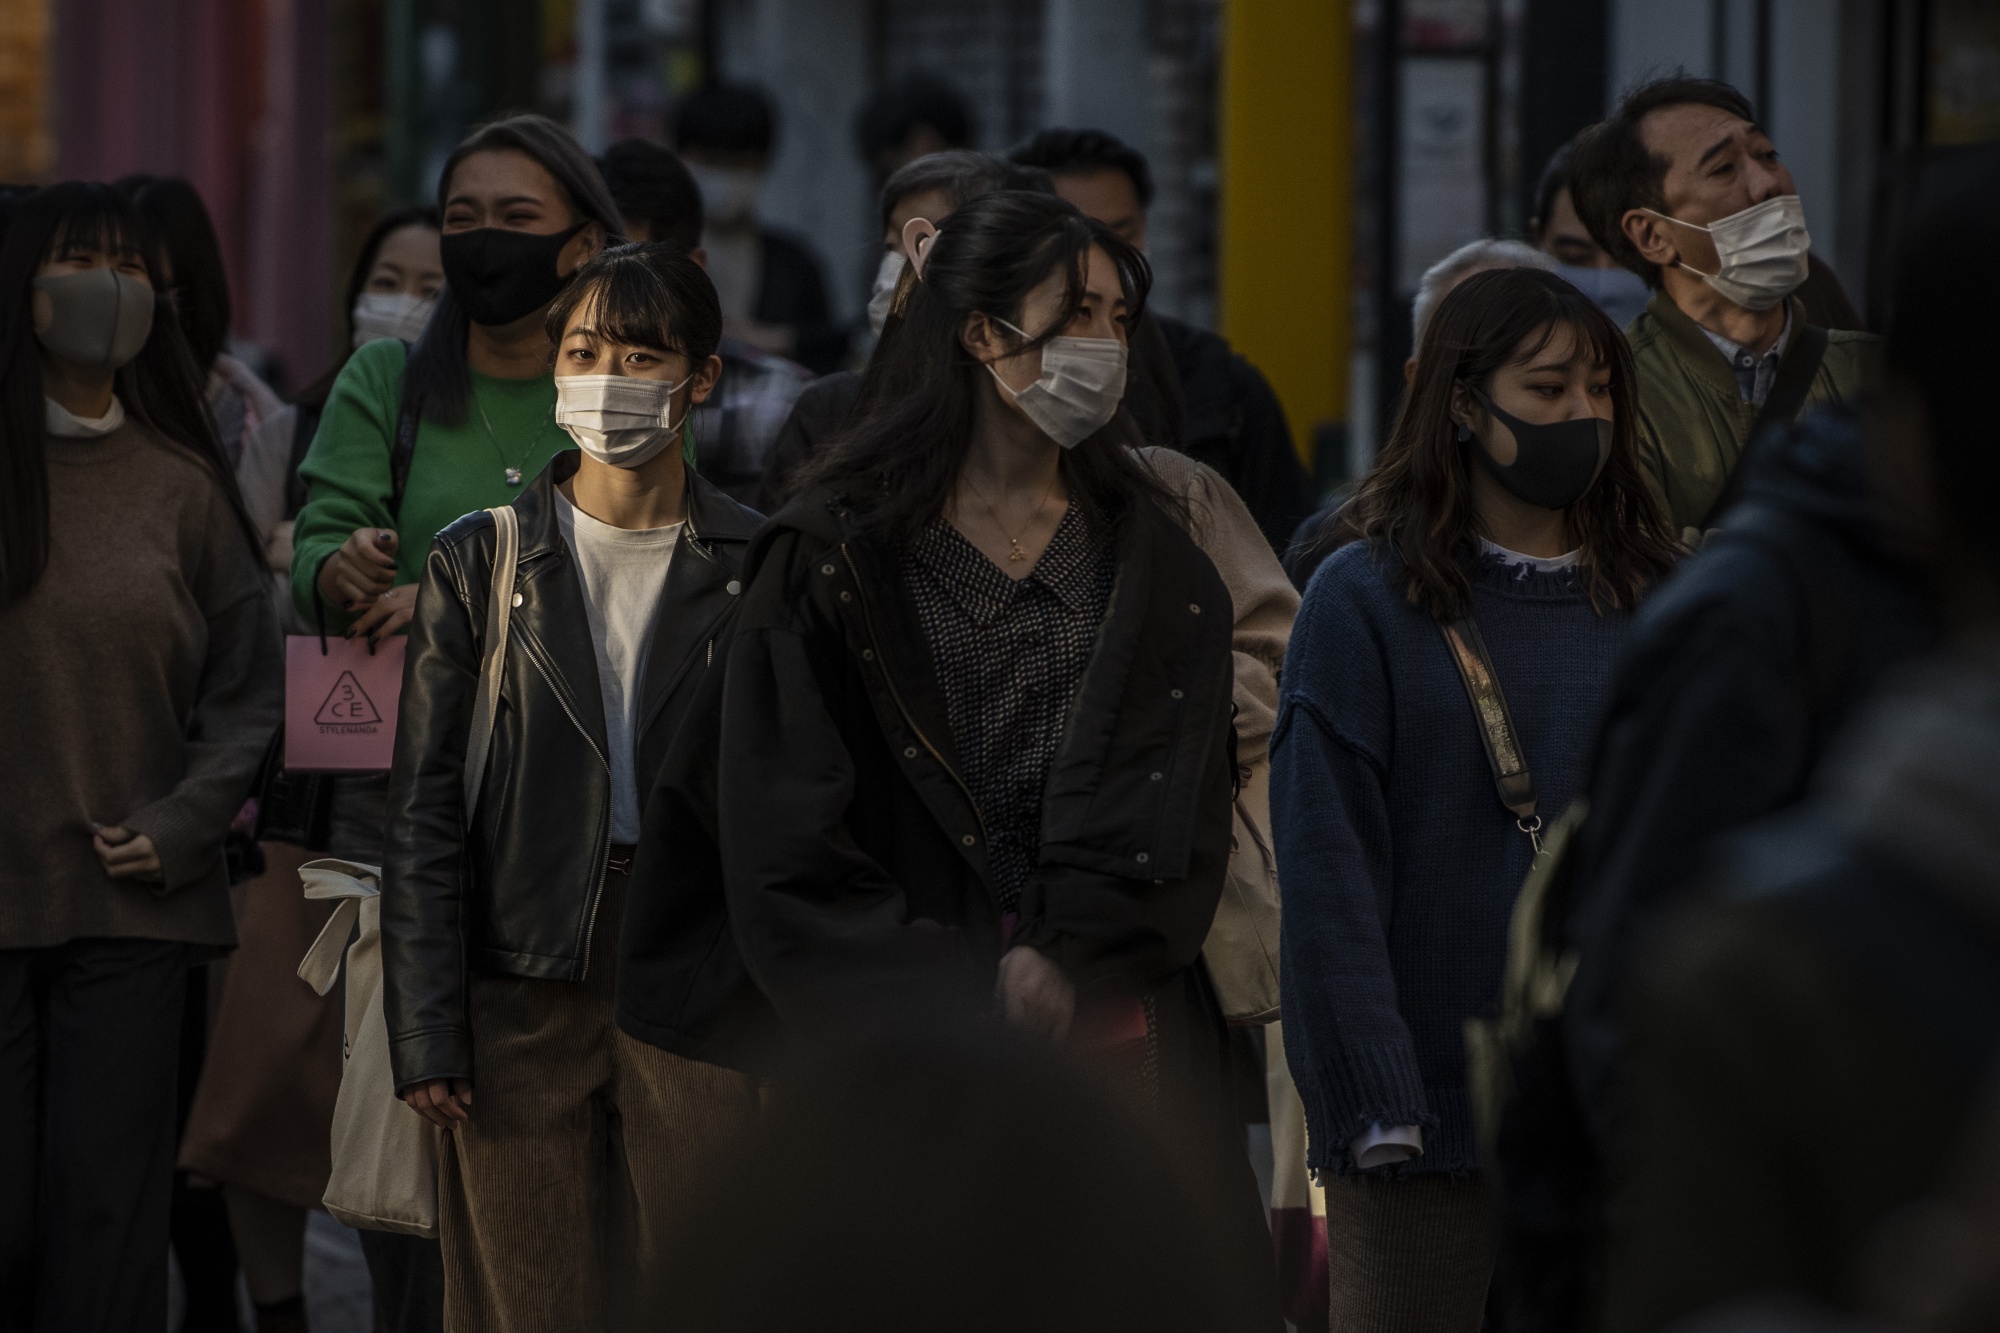 Tokyo recorded 298 cases Tuesday, and the figure is expected to rise over the coming days.